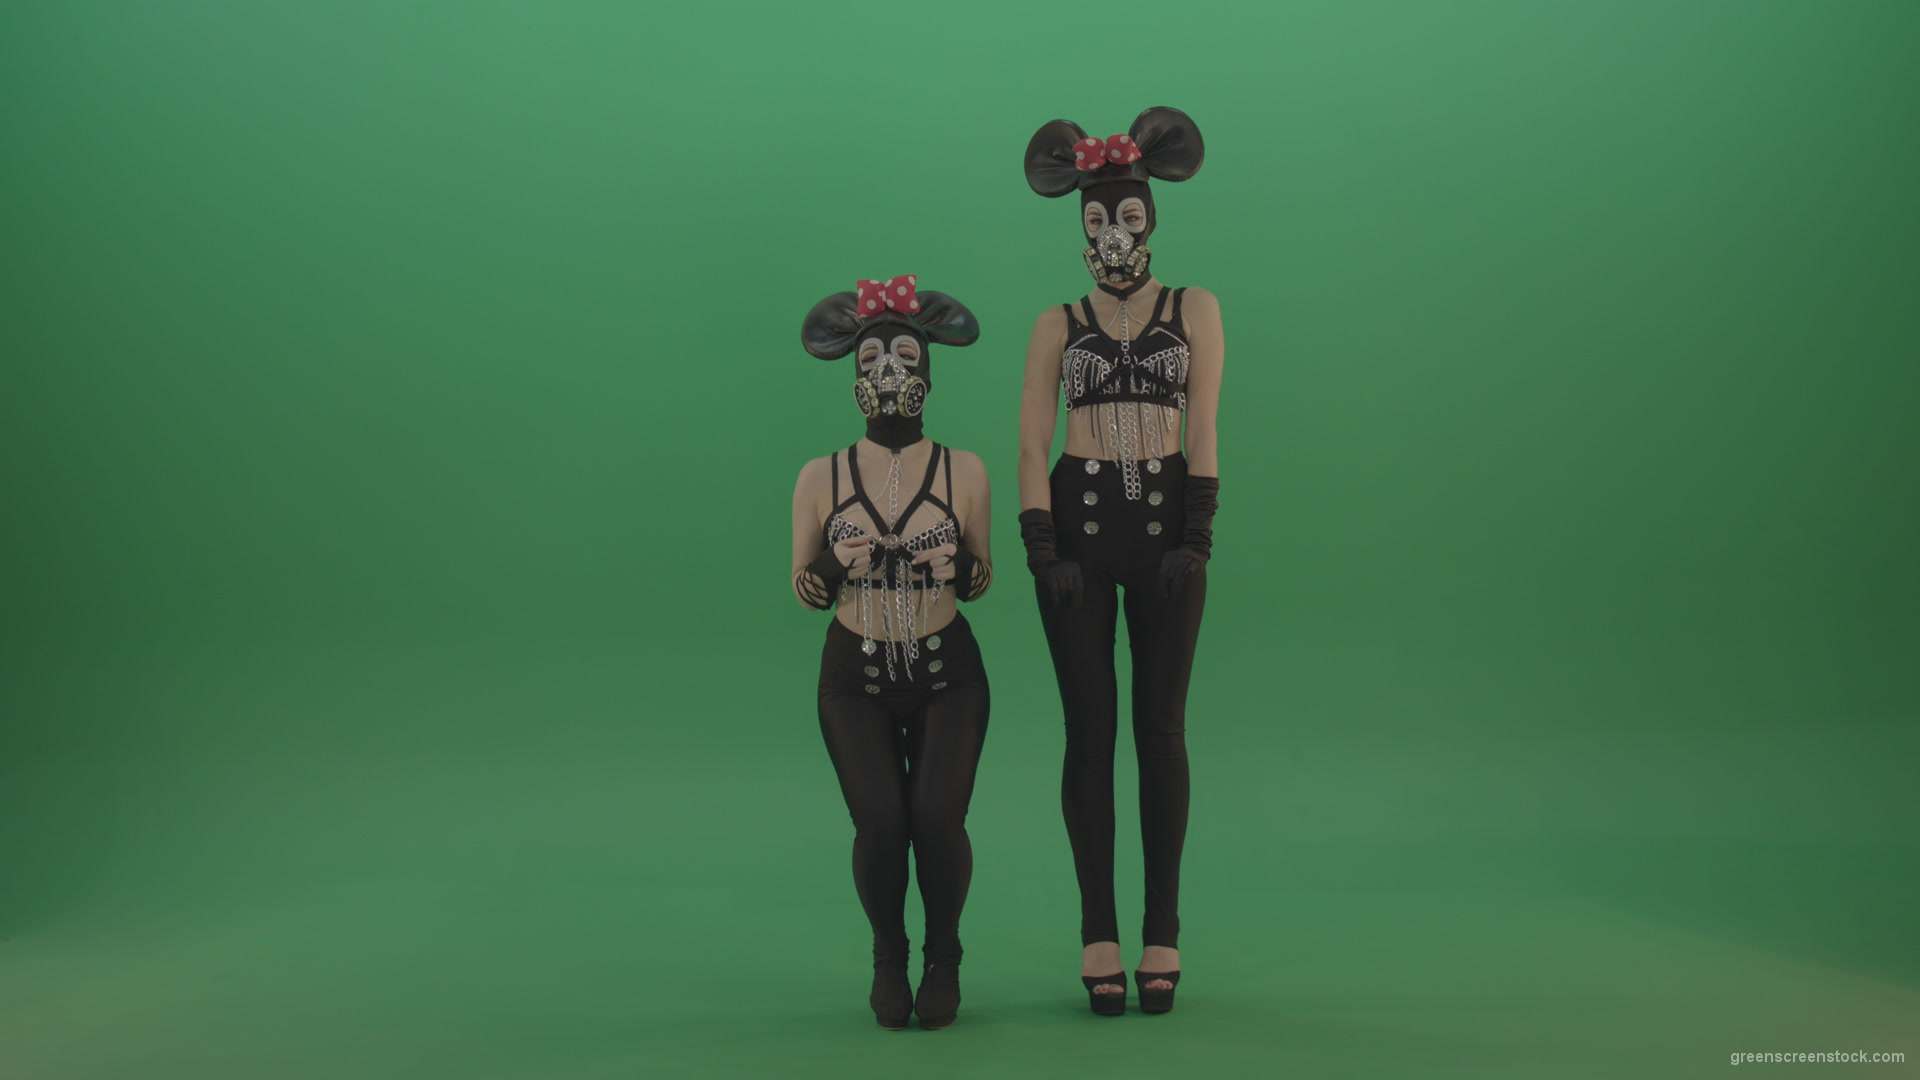 Two-girls-dressed-in-Mickey-Mouse-sit-squarelyon-green-screen_001 Green Screen Stock